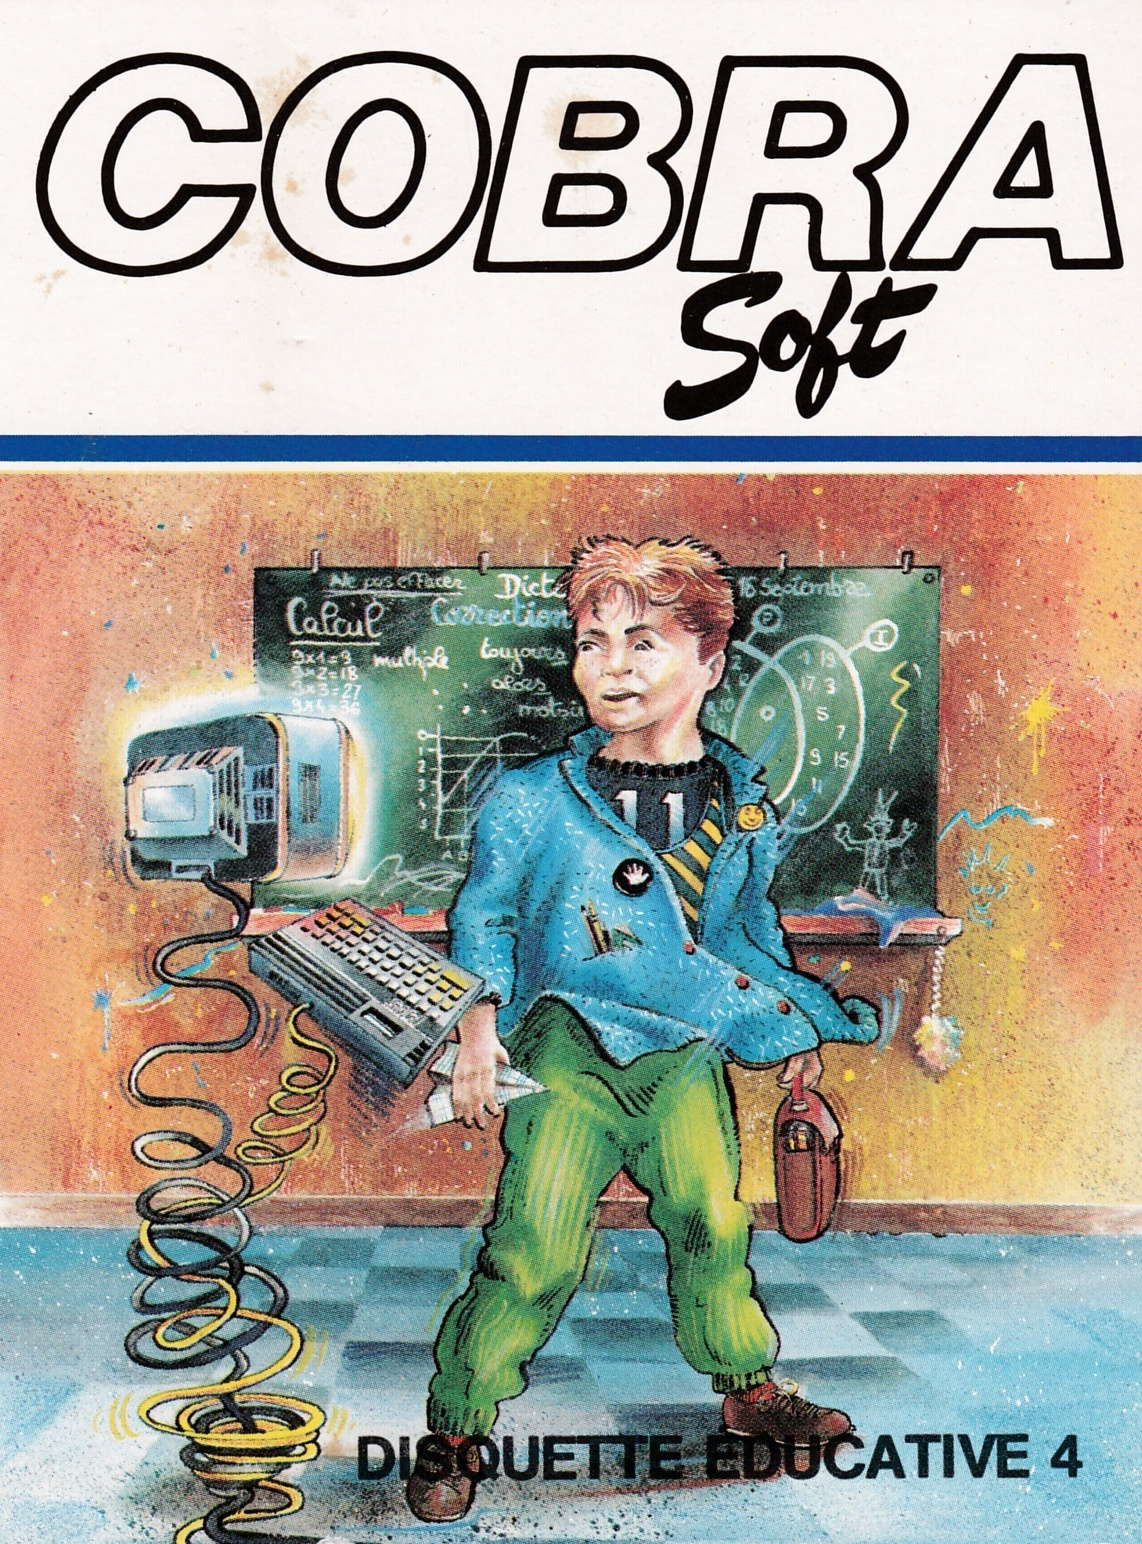 cover of the Amstrad CPC game Disquette Educative 4  by GameBase CPC